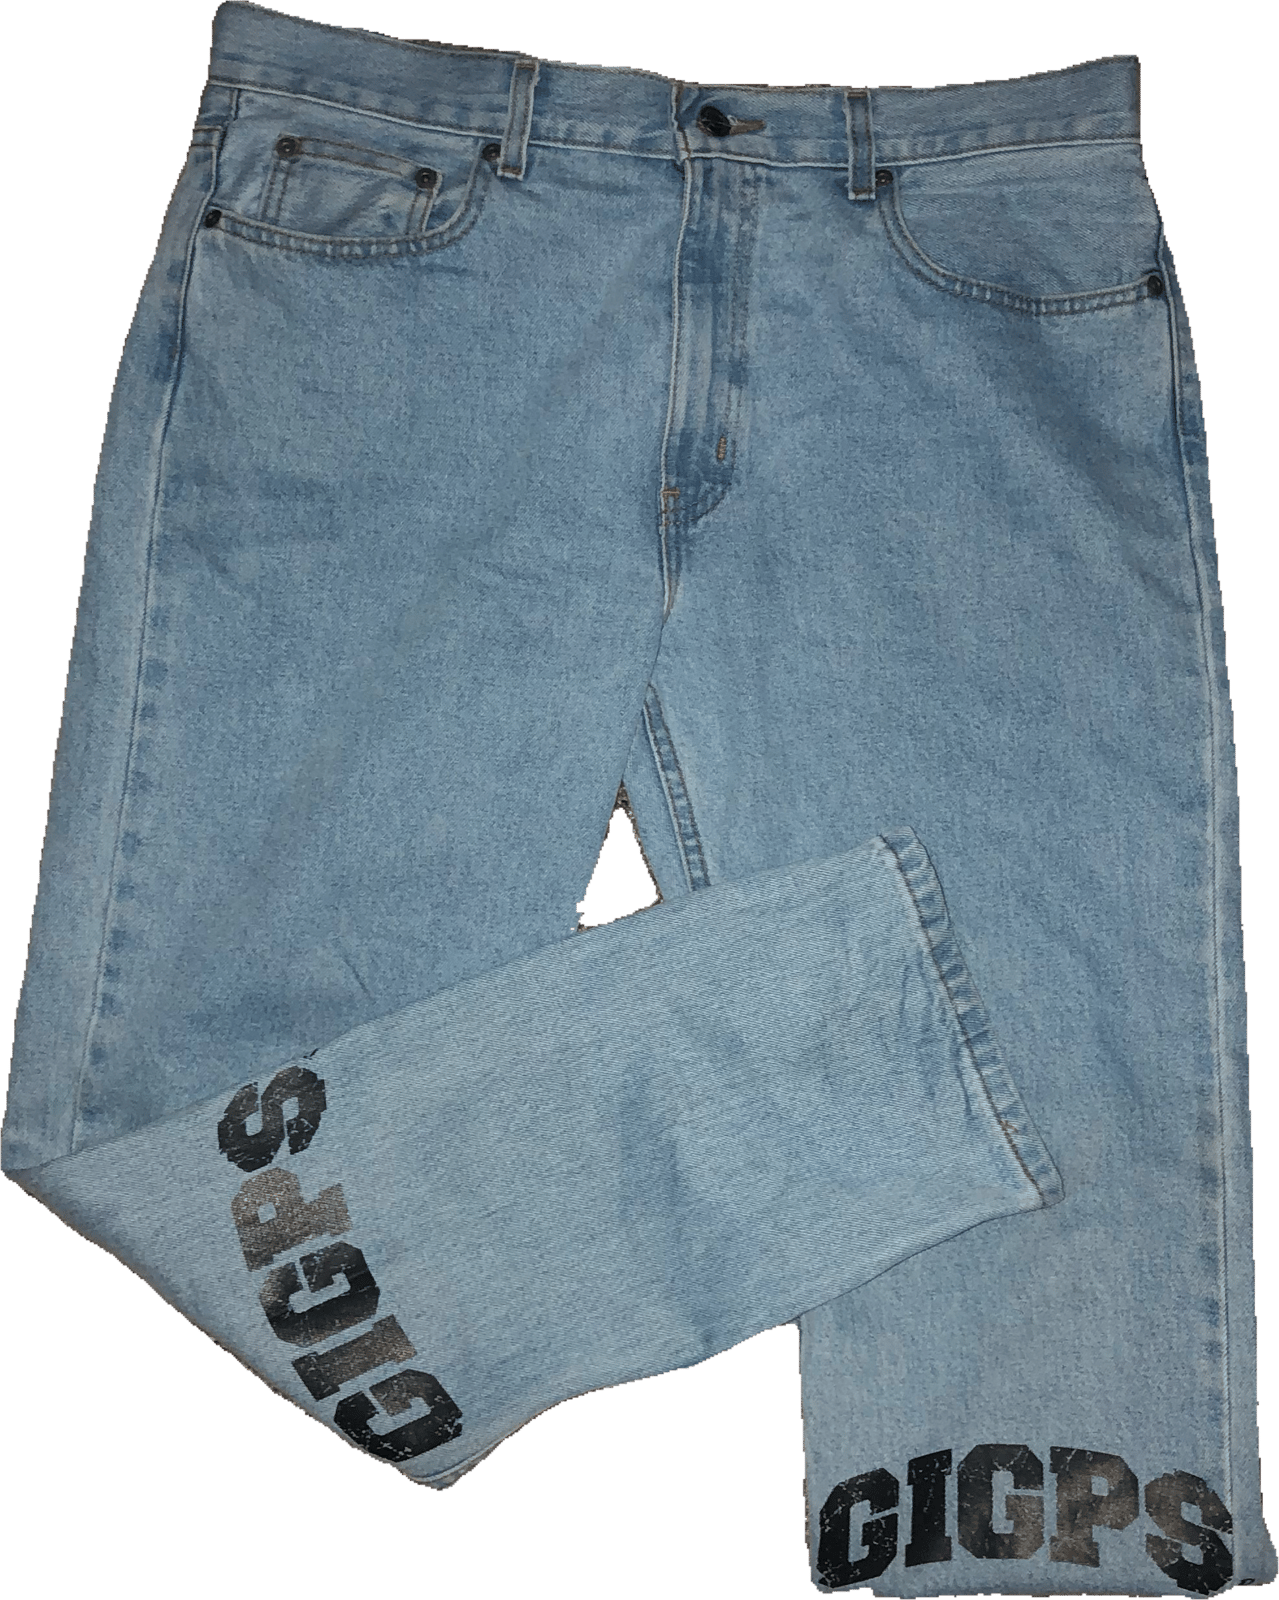 GIGPS New School 90s Jeans / GOD IS GREAT PAPER STRAIGHT